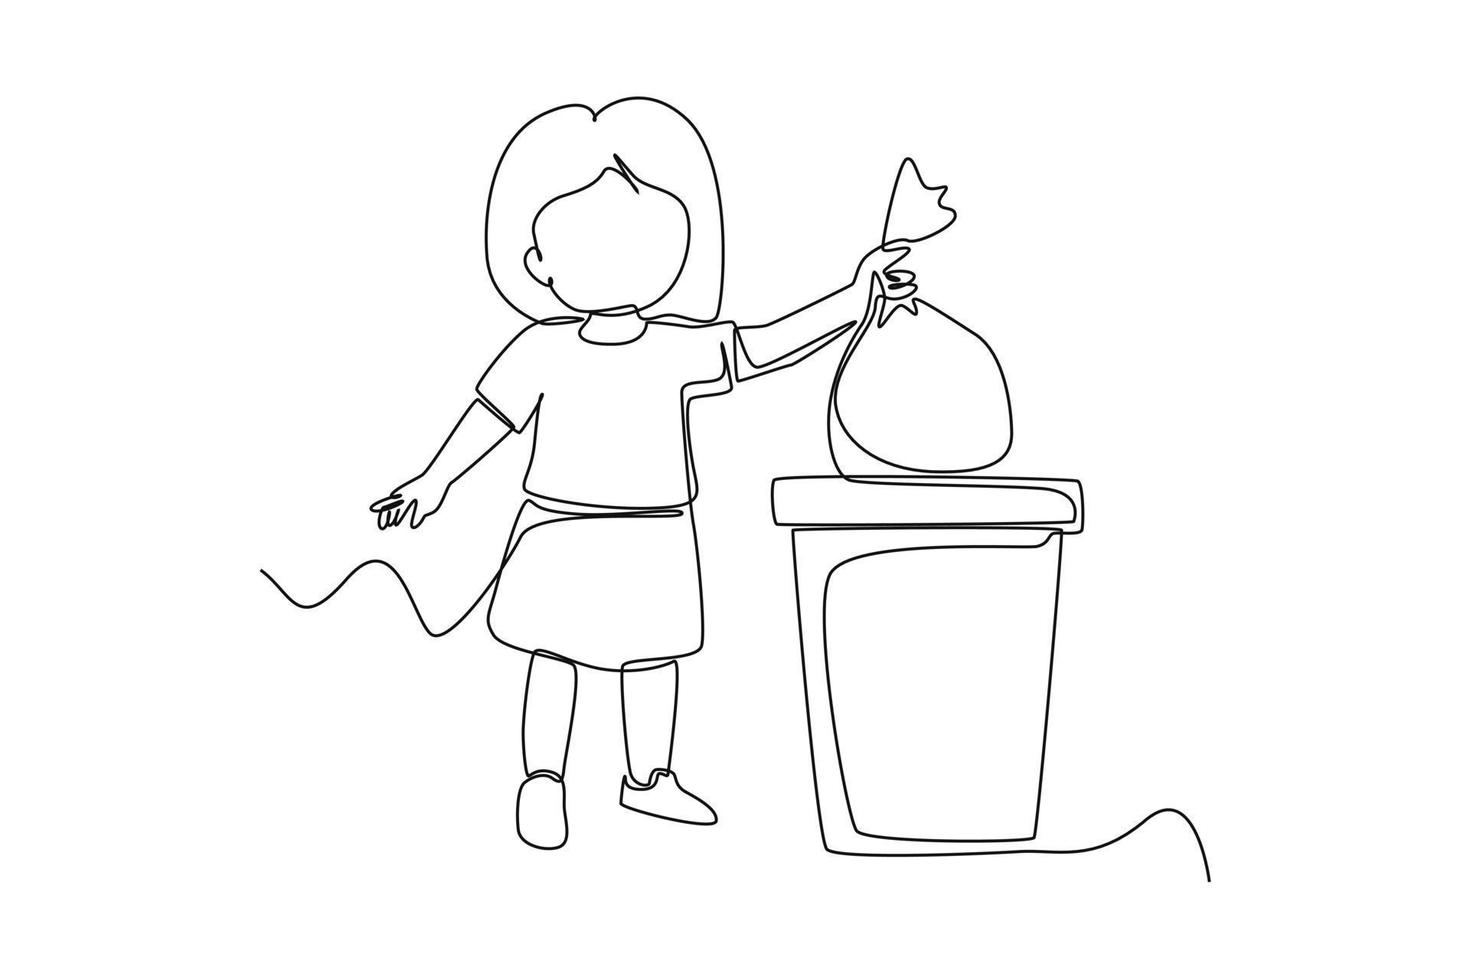 Single one line drawing little kid throw trash to trash bin. Healthcare at school concept. Continuous line draw design graphic vector illustration.